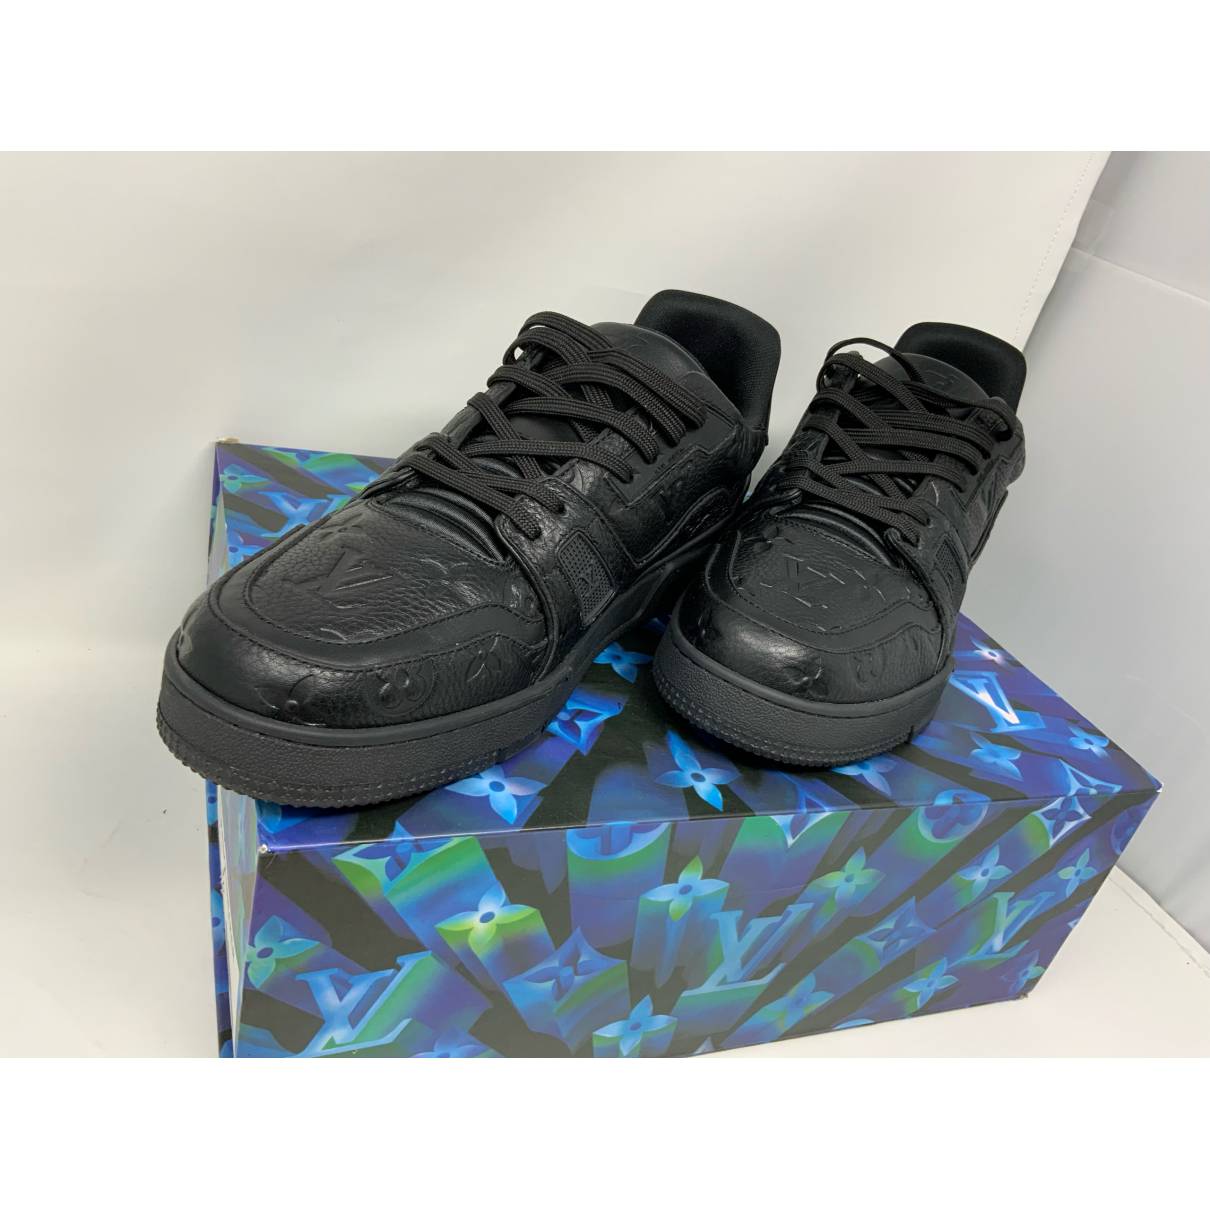 Lv trainer leather high trainers Louis Vuitton Black size 13 UK in Leather  - 33890386